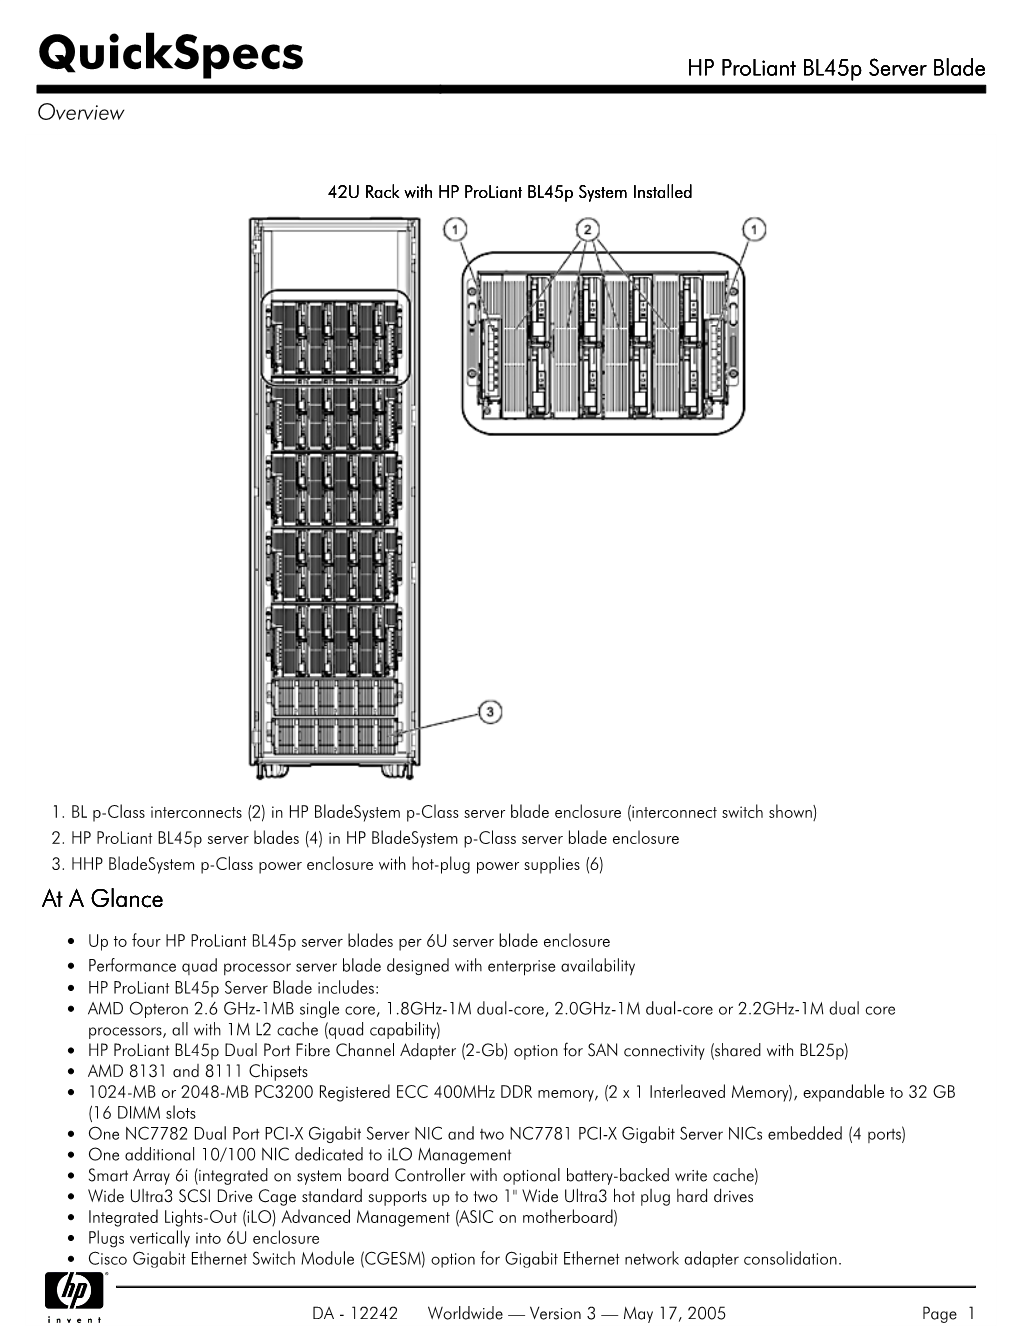 HP Proliant Bl45p Server Blade Overview